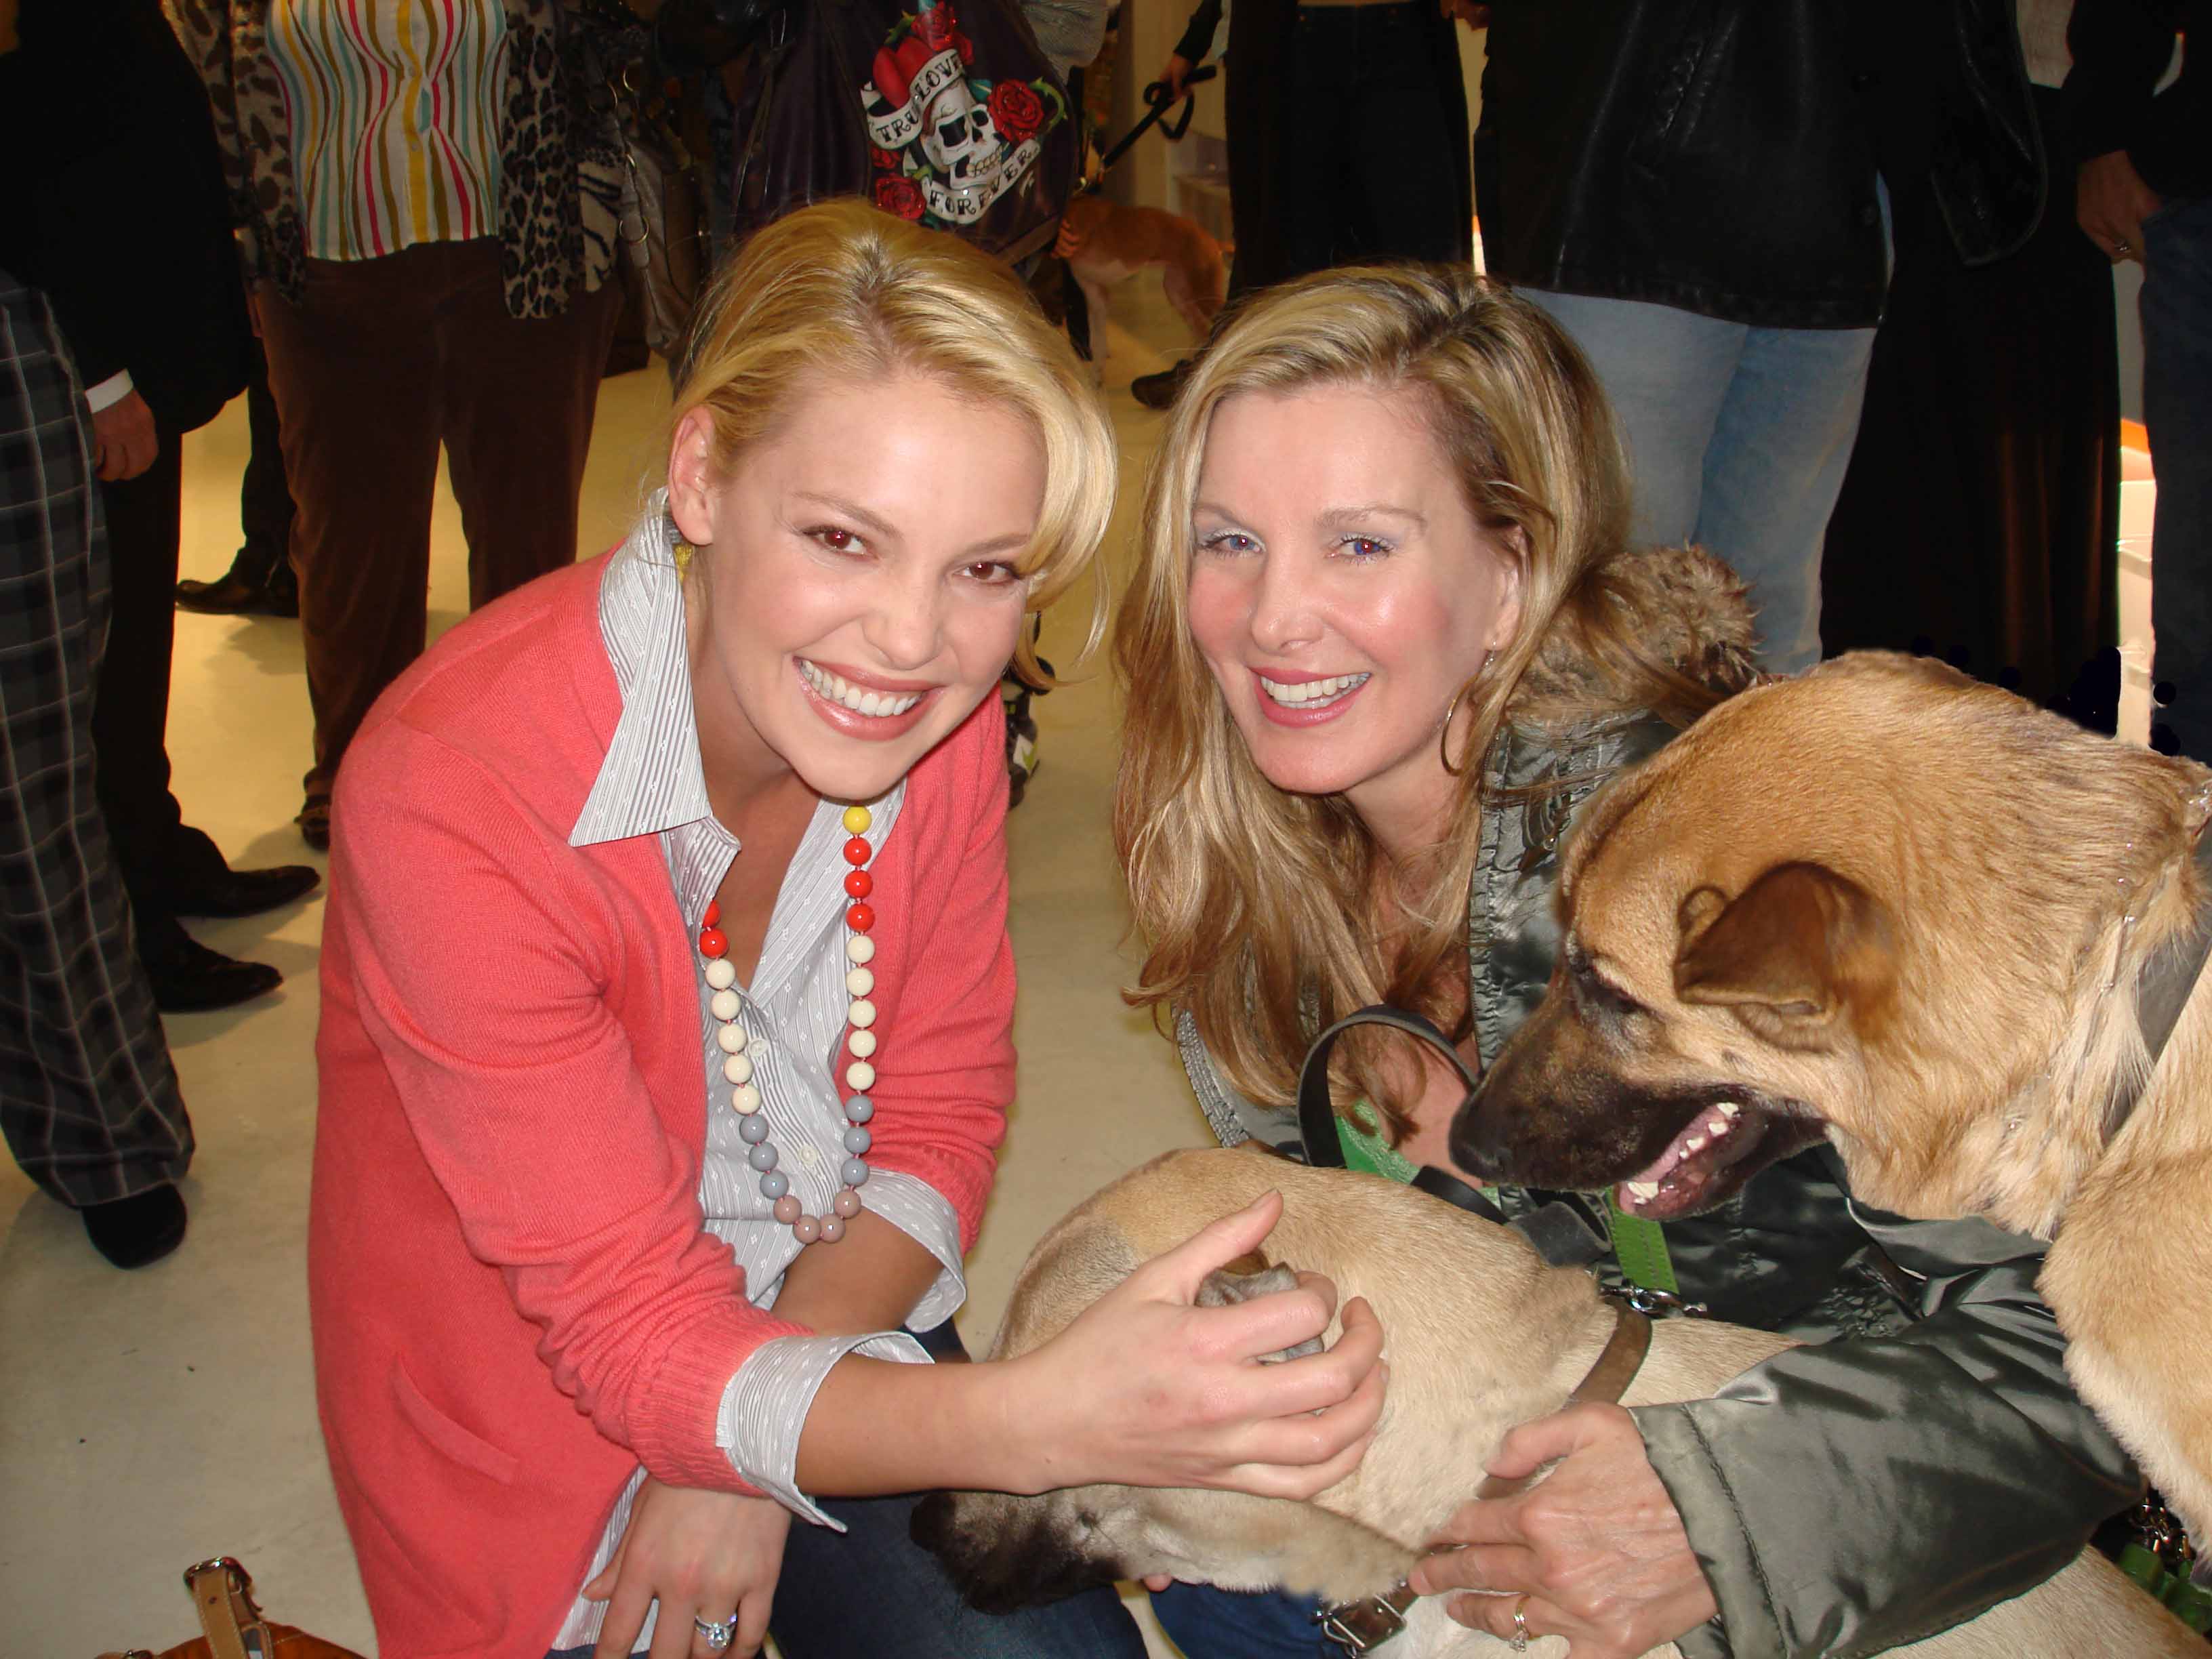 Katherine Heigl with Smiley, Angel and Megan Blake at opening of Orange Bone a rescue store for rescued animals. Woof!